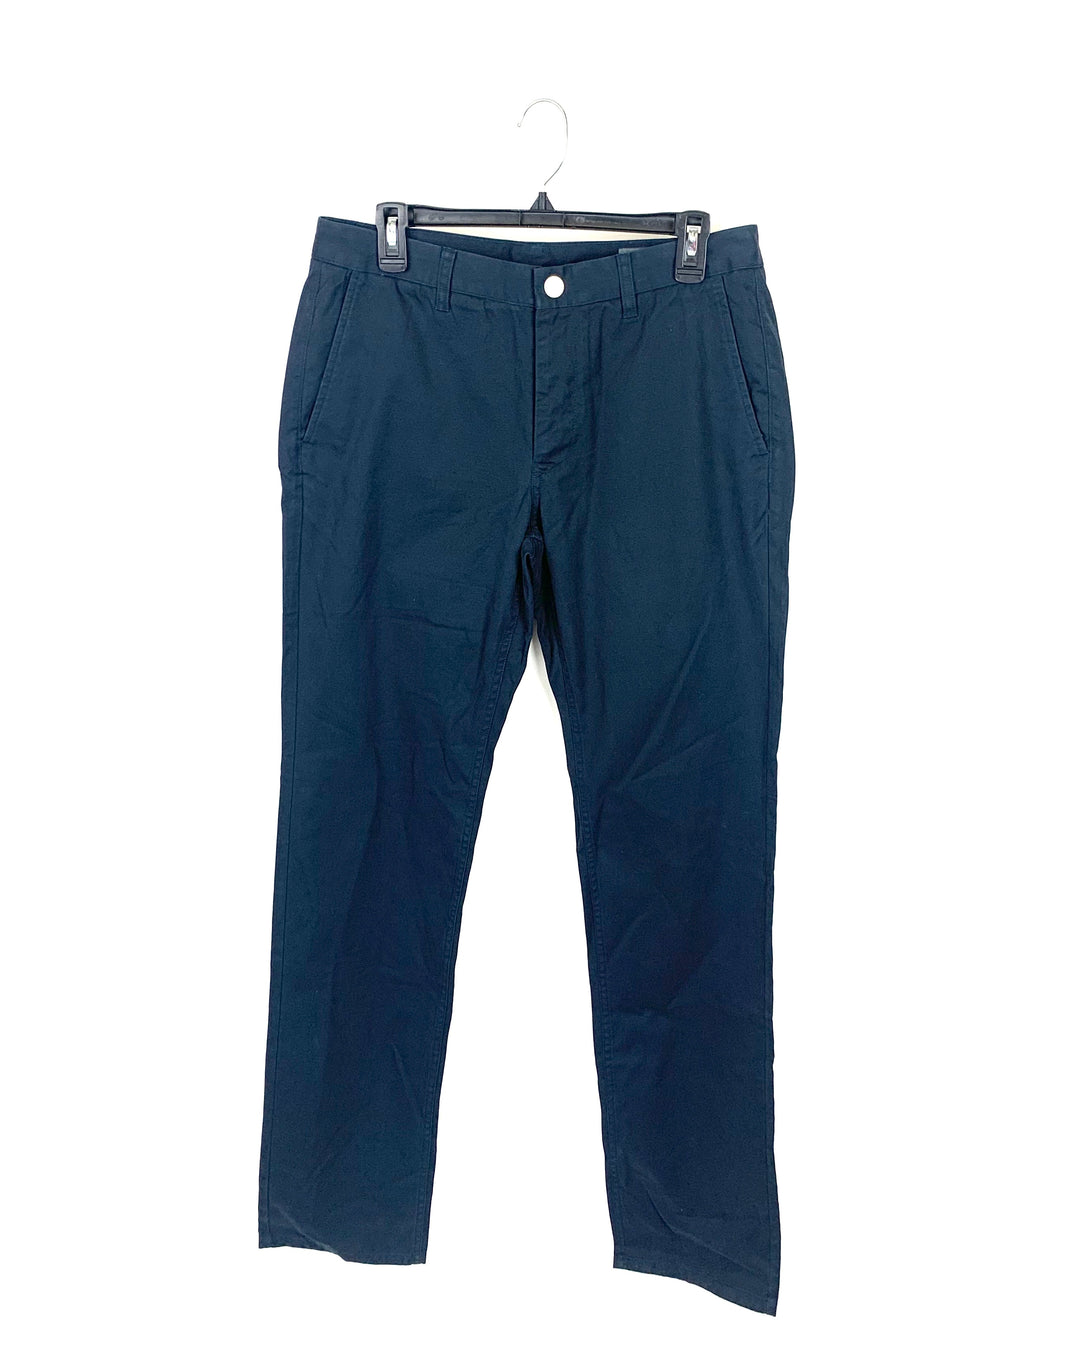 MENS Dark Navy Pant With Checkered Lining - Various Sizes In Slim or Slim Straight